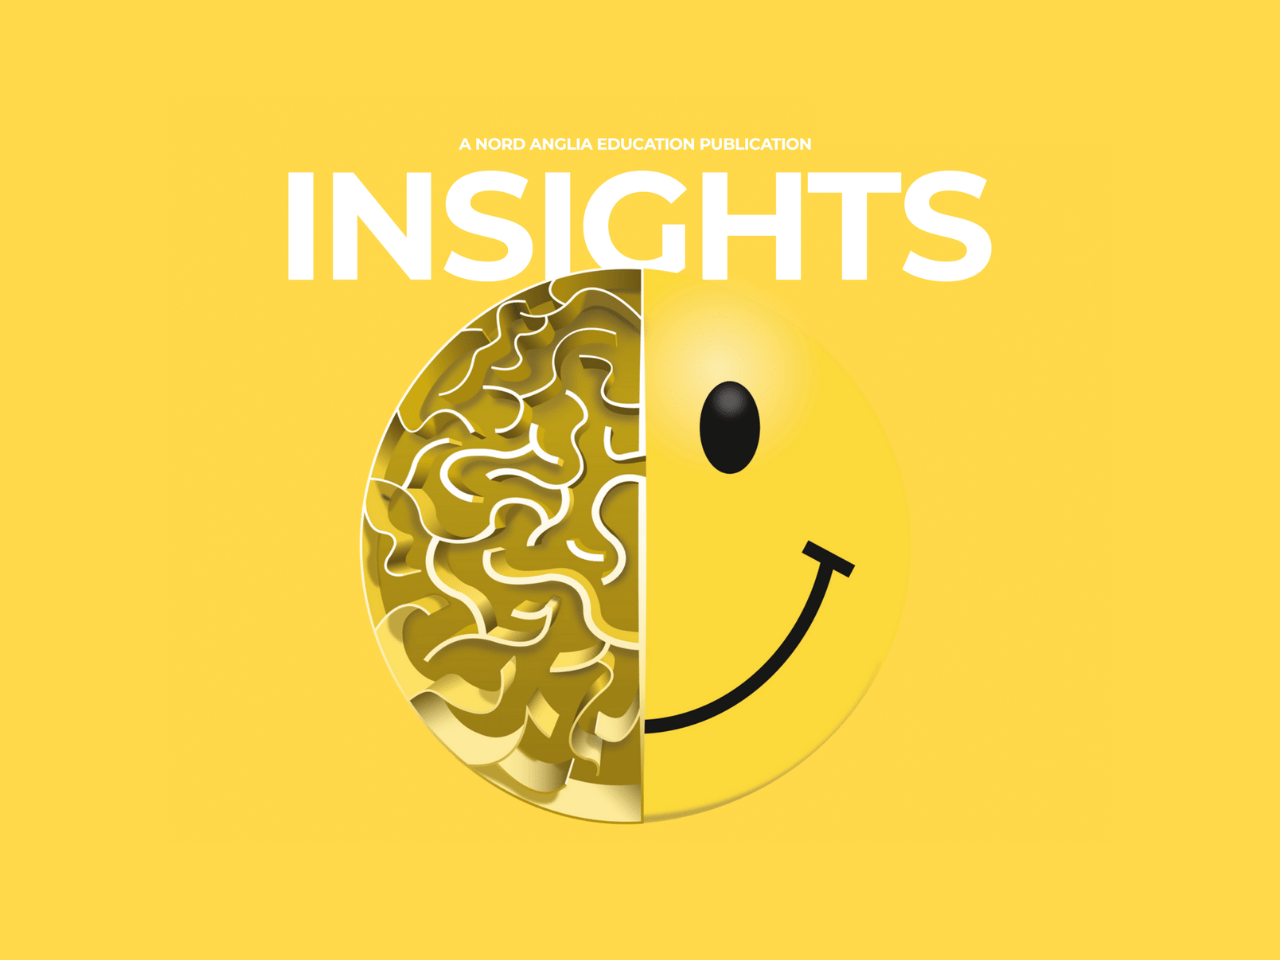 Introducing INSIGHTS—a refreshingly honest view on the future of education-Introducing INSIGHTS-insights-magazine-promotional-poster-by-nord-anglia